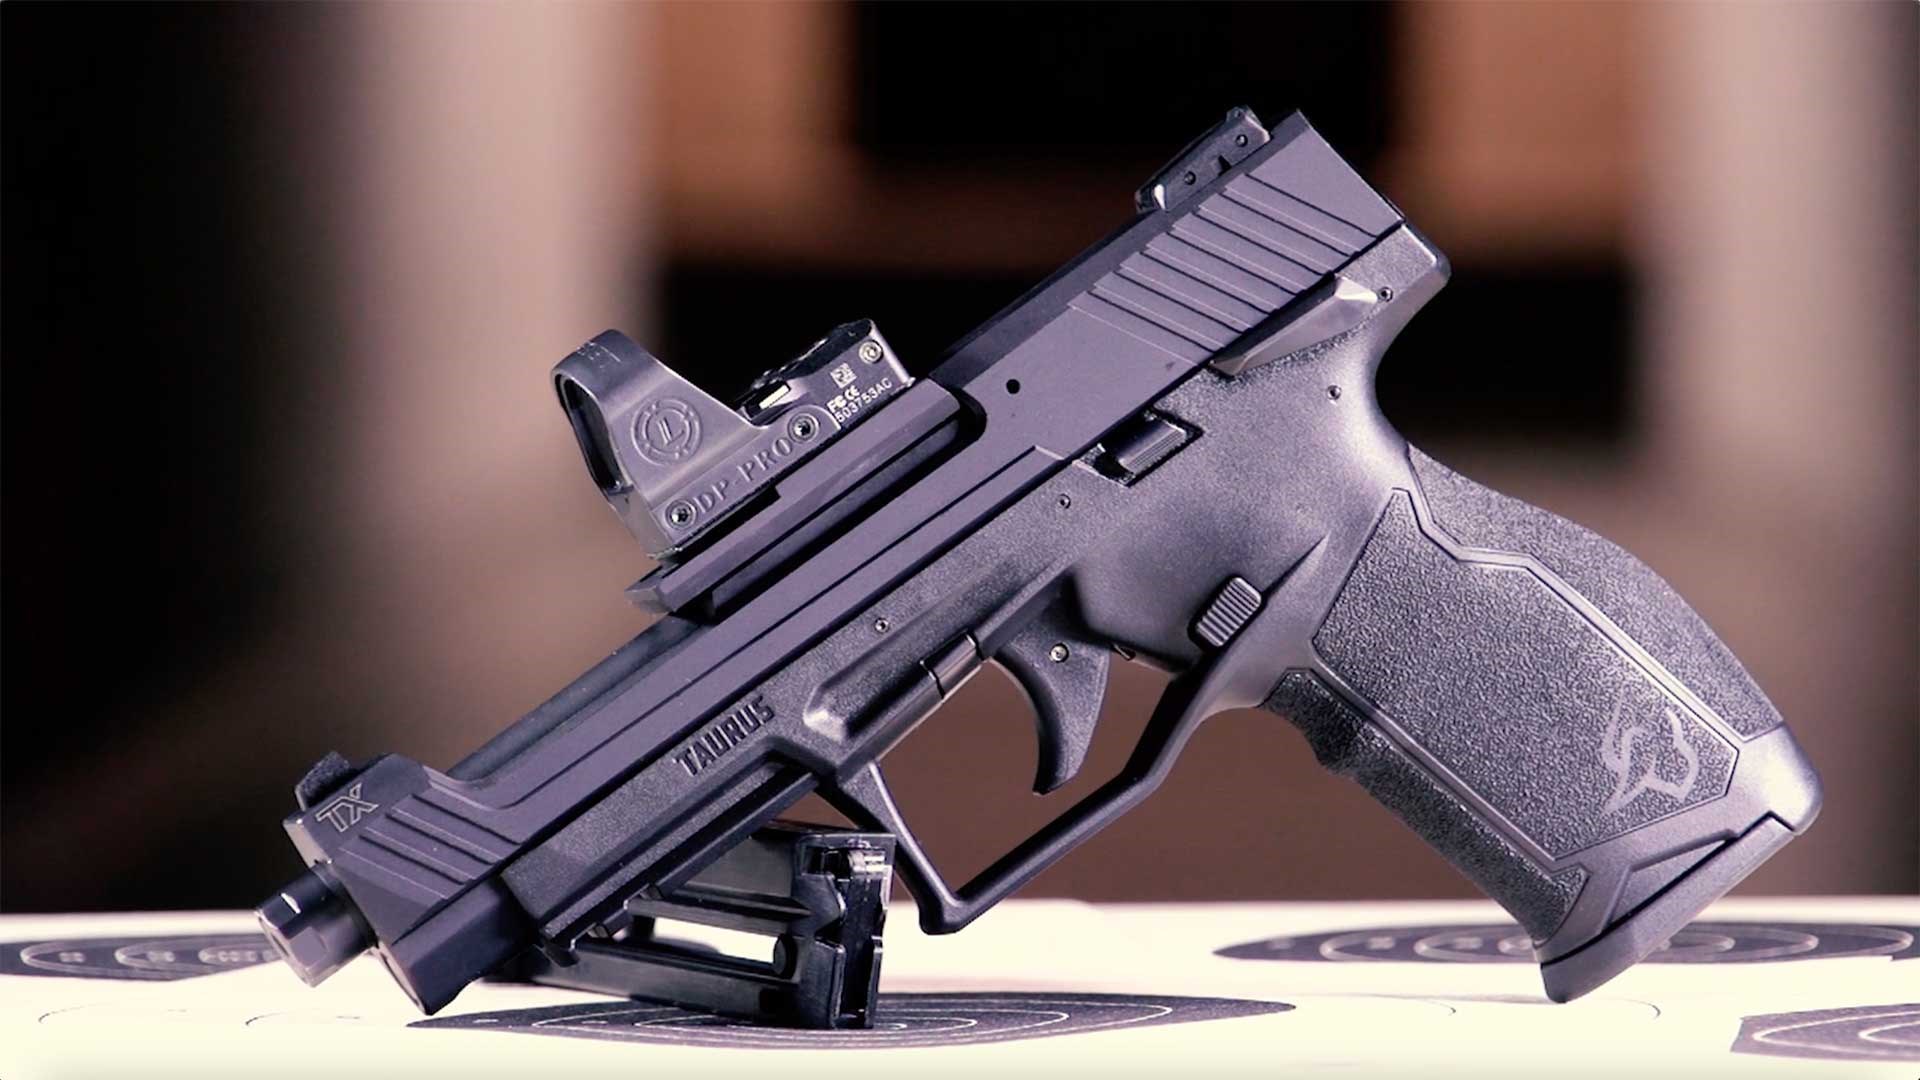 Left side of the Taurus TX22 Competition pistol.